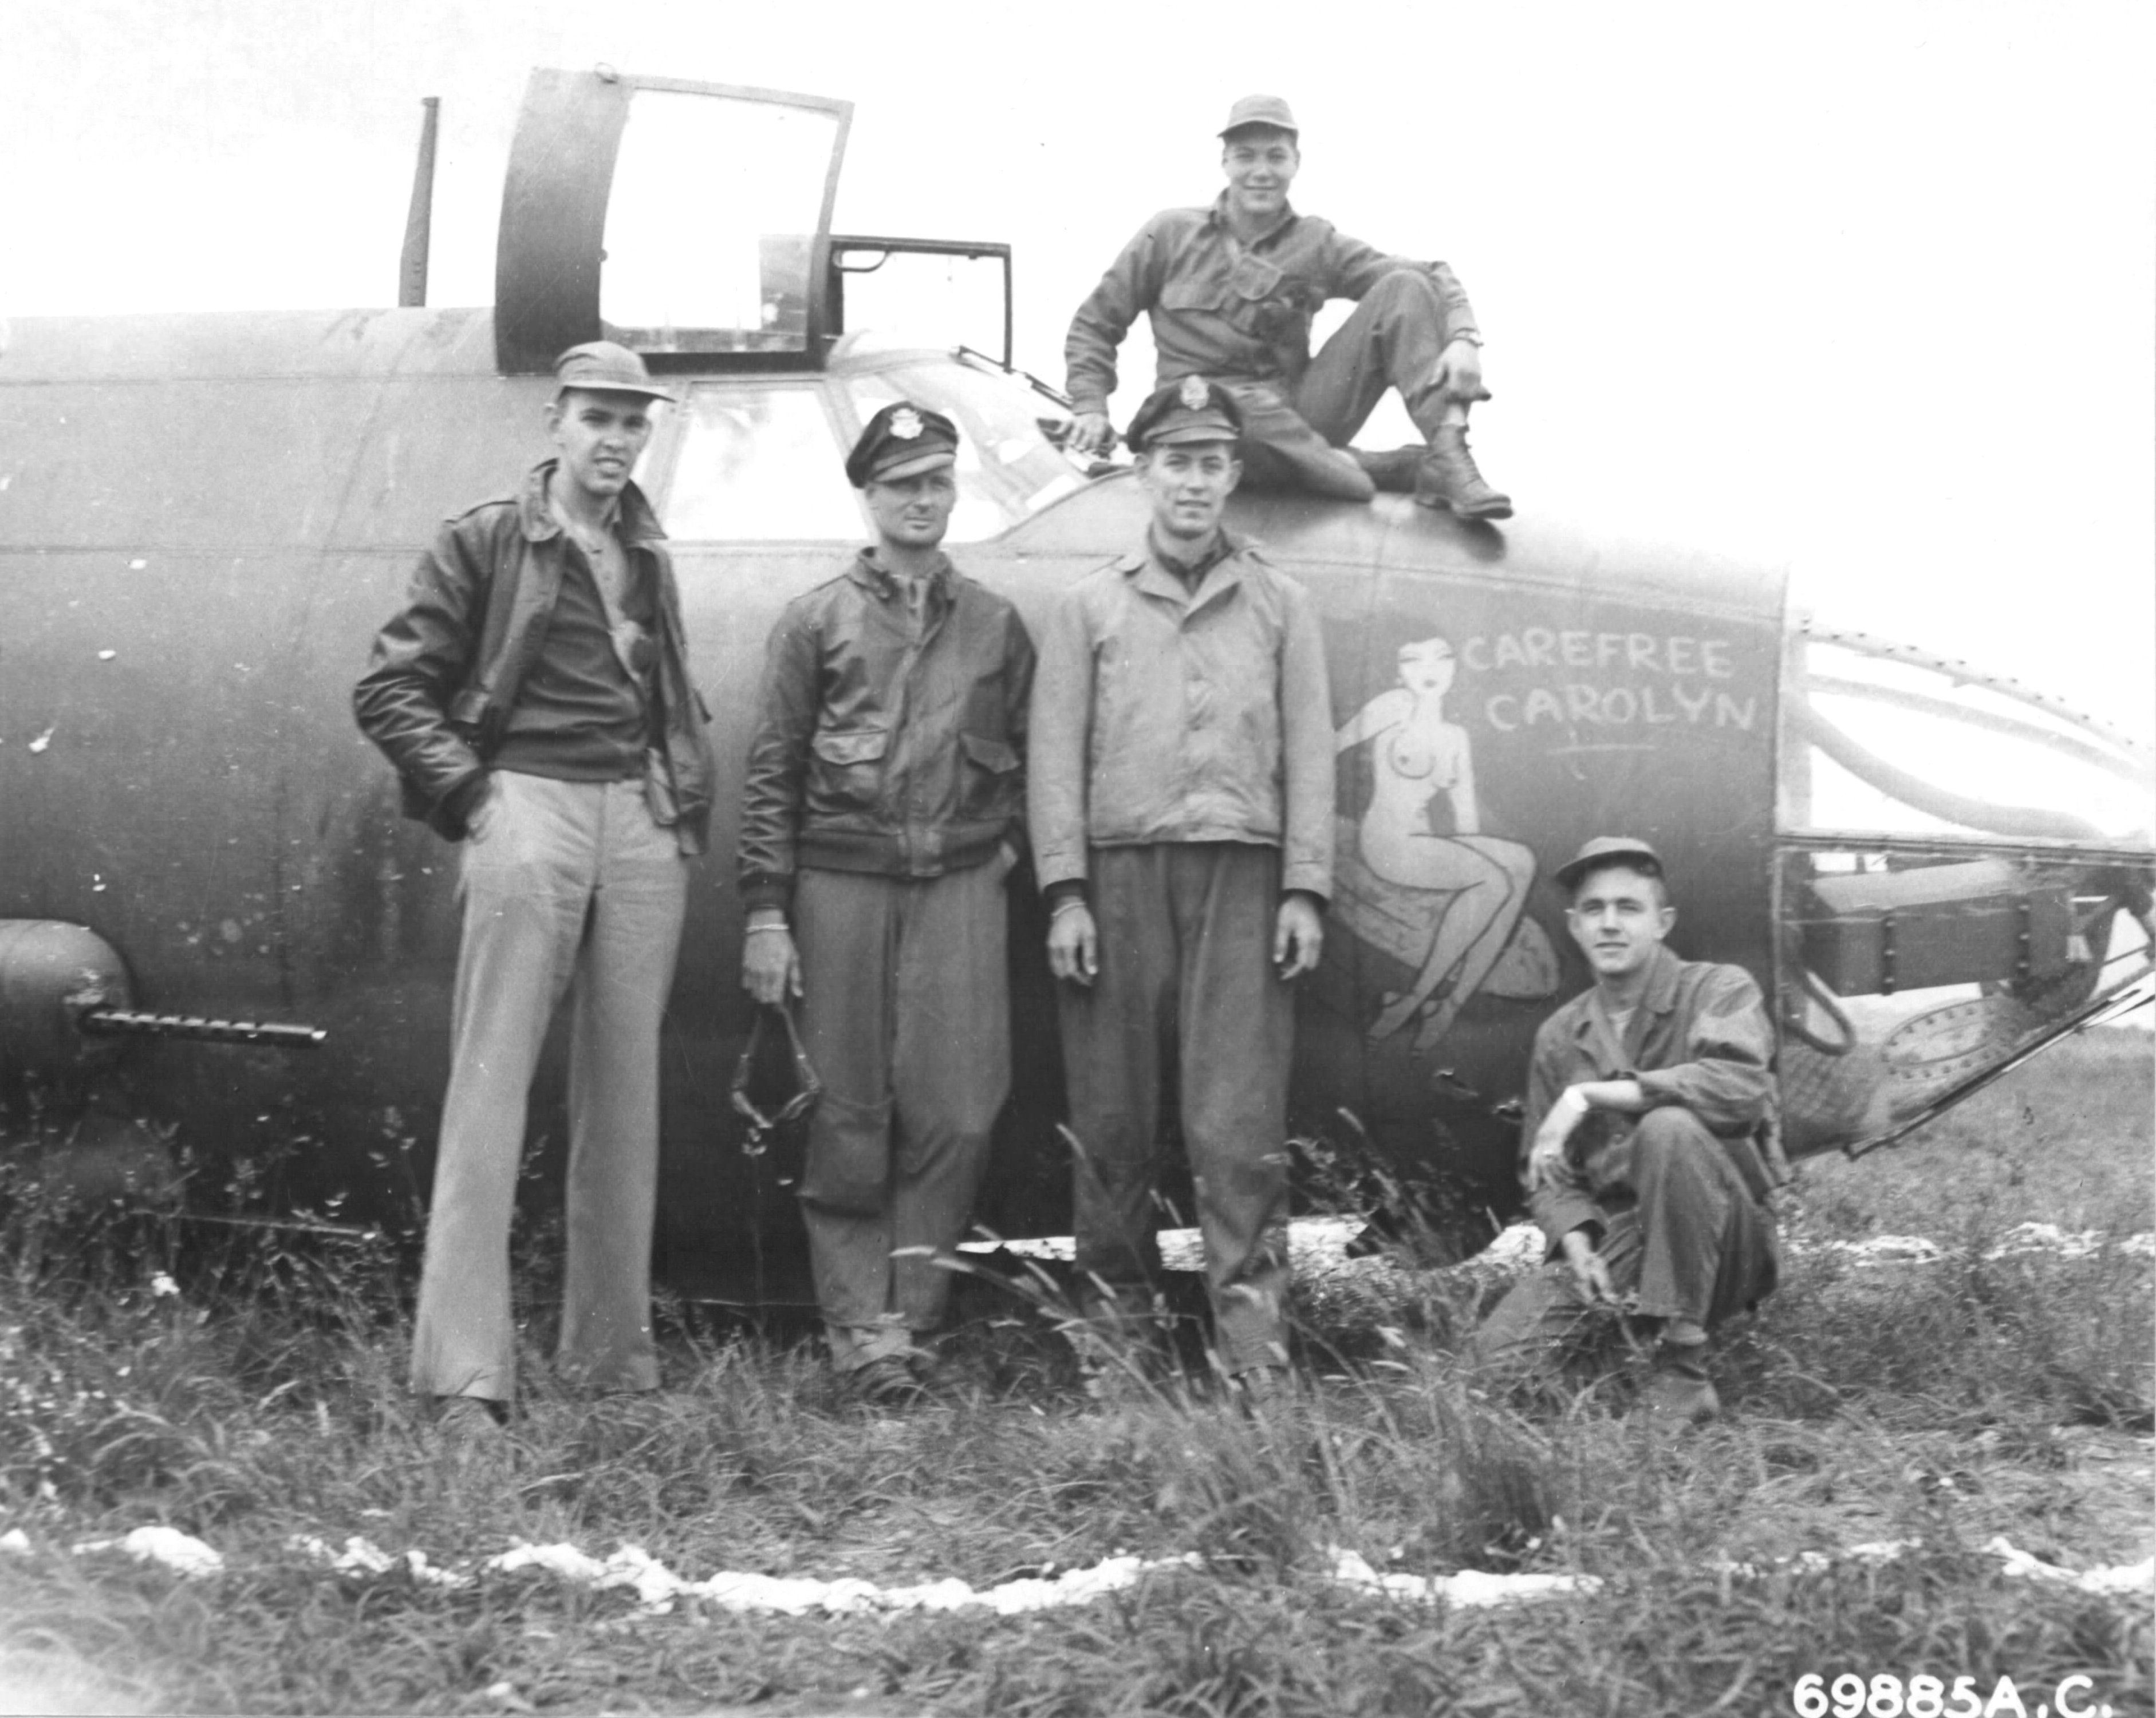 Crew of B-26C Marauder “Carefree Carolyn” of the 552nd Bomb Squadron in front of their airplane after making a wheels-up landing, RAF Great Dunmow, Essex, England, June 15 1944. This was the aircraft’s 100th mission. Photo 2 of 2